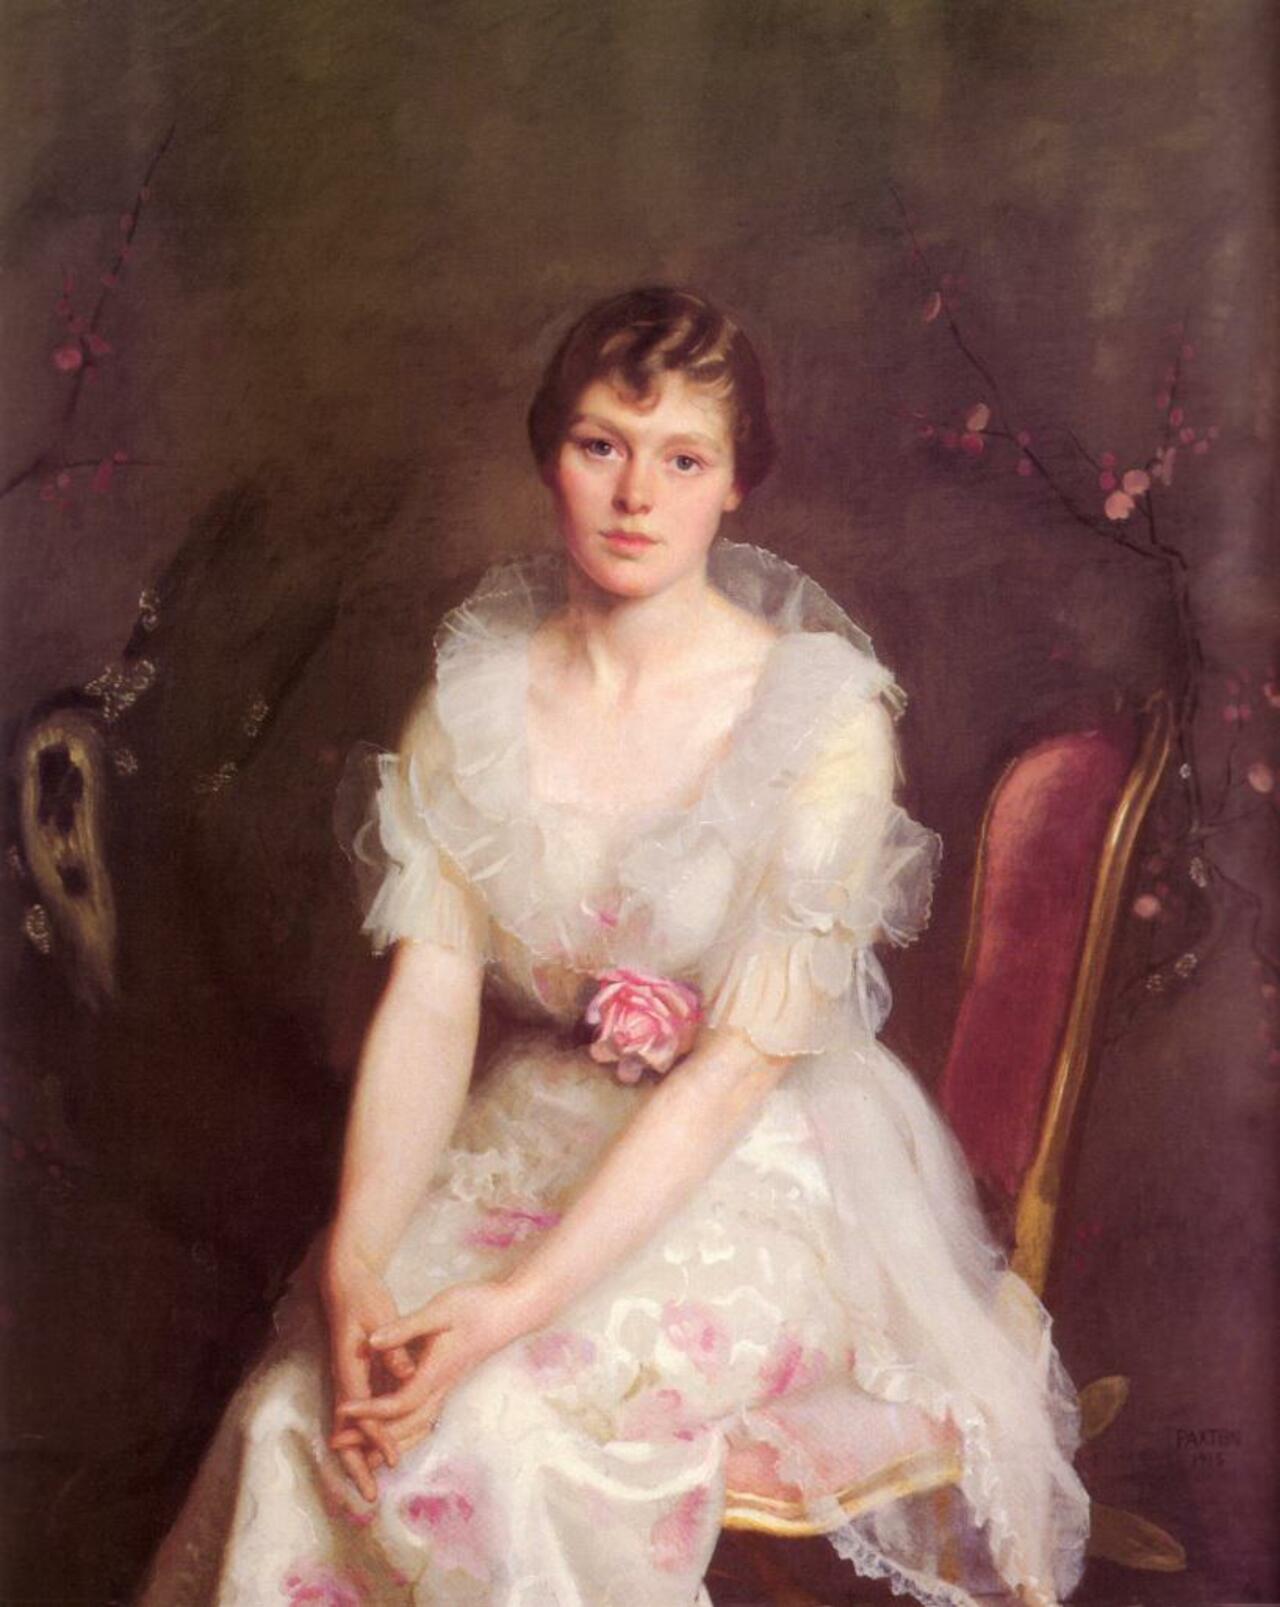 RT @Desailaur: Portrait of Louise Converse
William McGregor Paxton #art http://t.co/yXgwB9f3YL